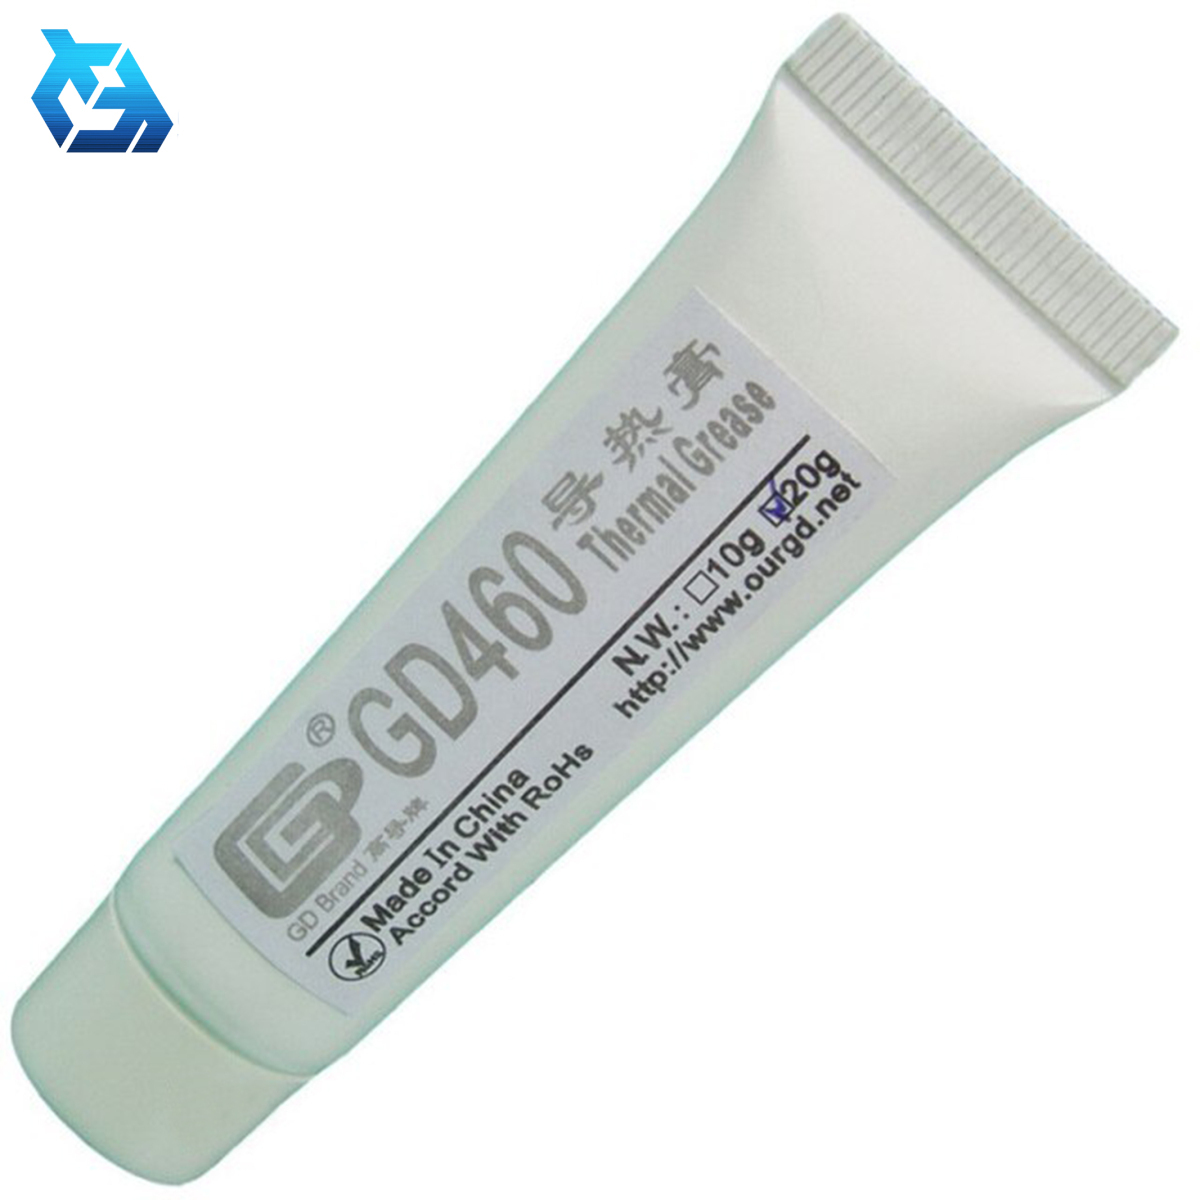 GD brand high capacity 20g GD460 silver CPU grease silicon grease isolation . type heat sink height performance x1 [ tube type ]